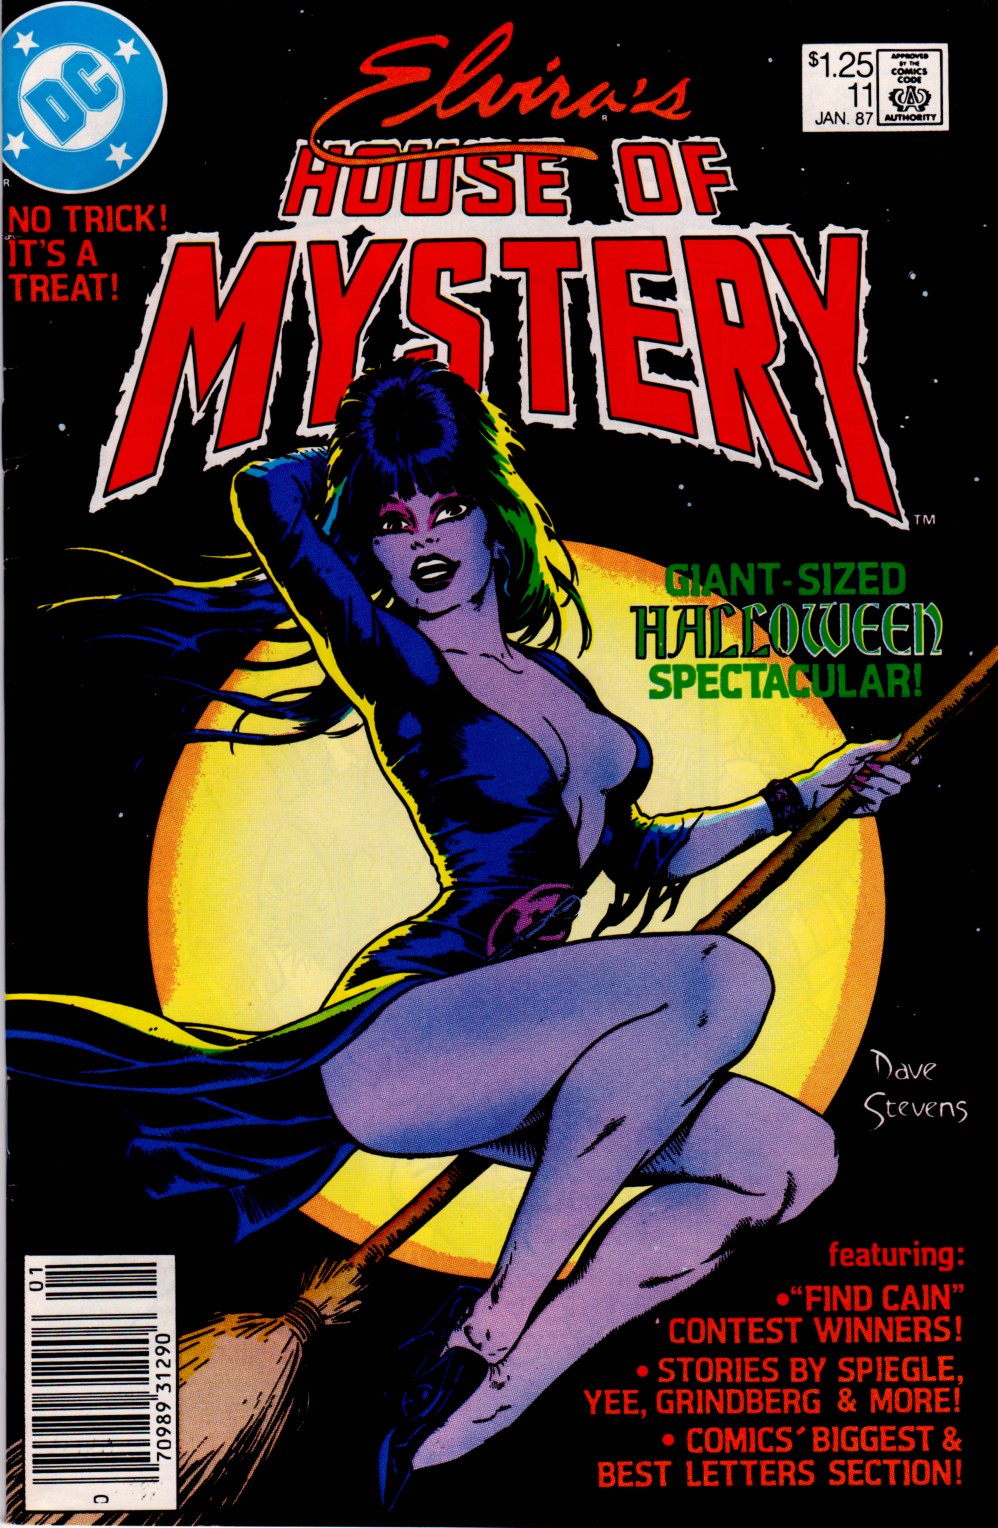 Elvira's House of Mystery 11 Page 1